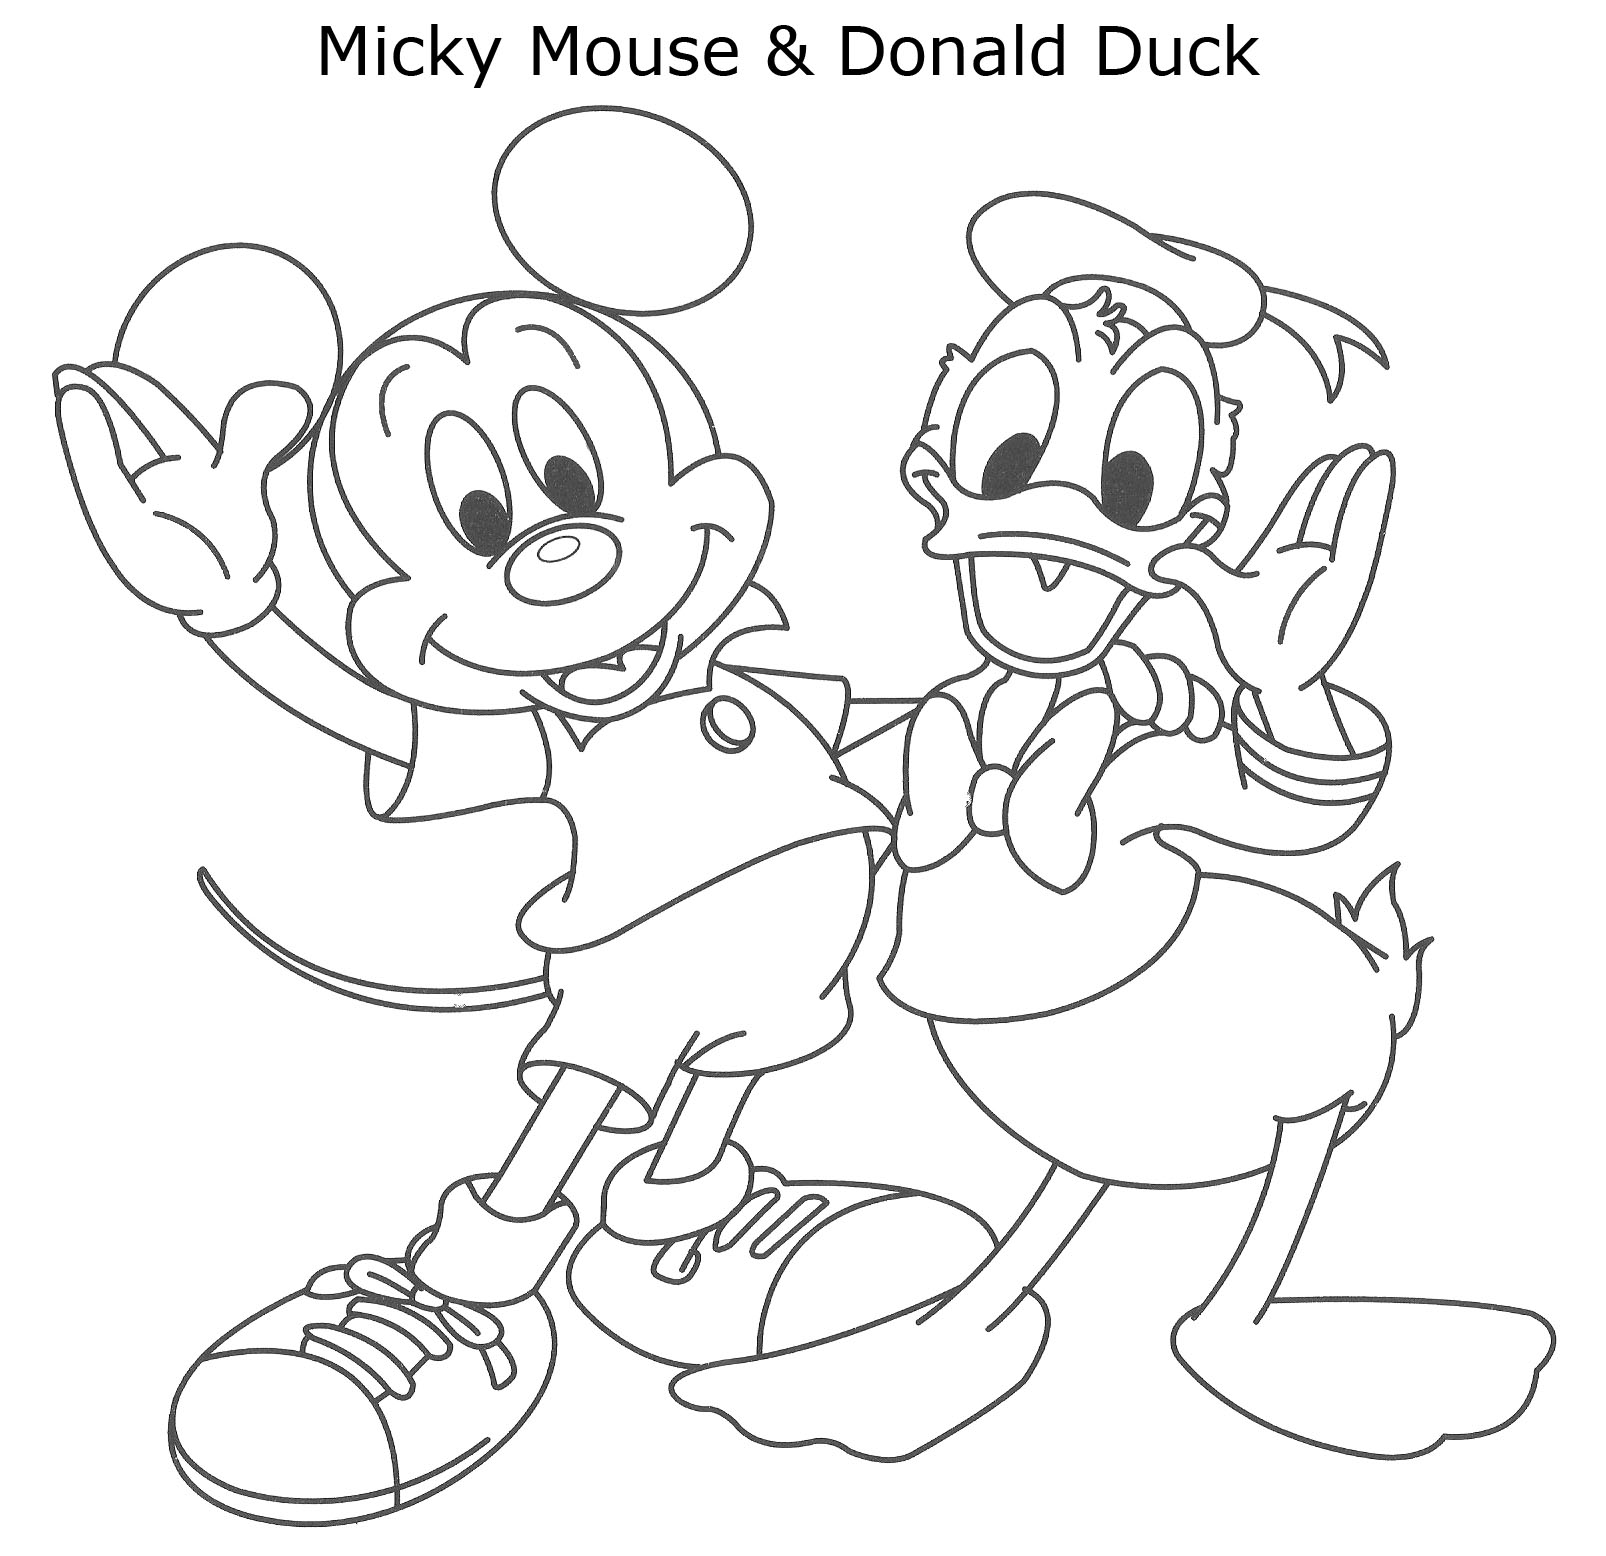 Download Donald Duck #30311 (Cartoons) - Printable coloring pages